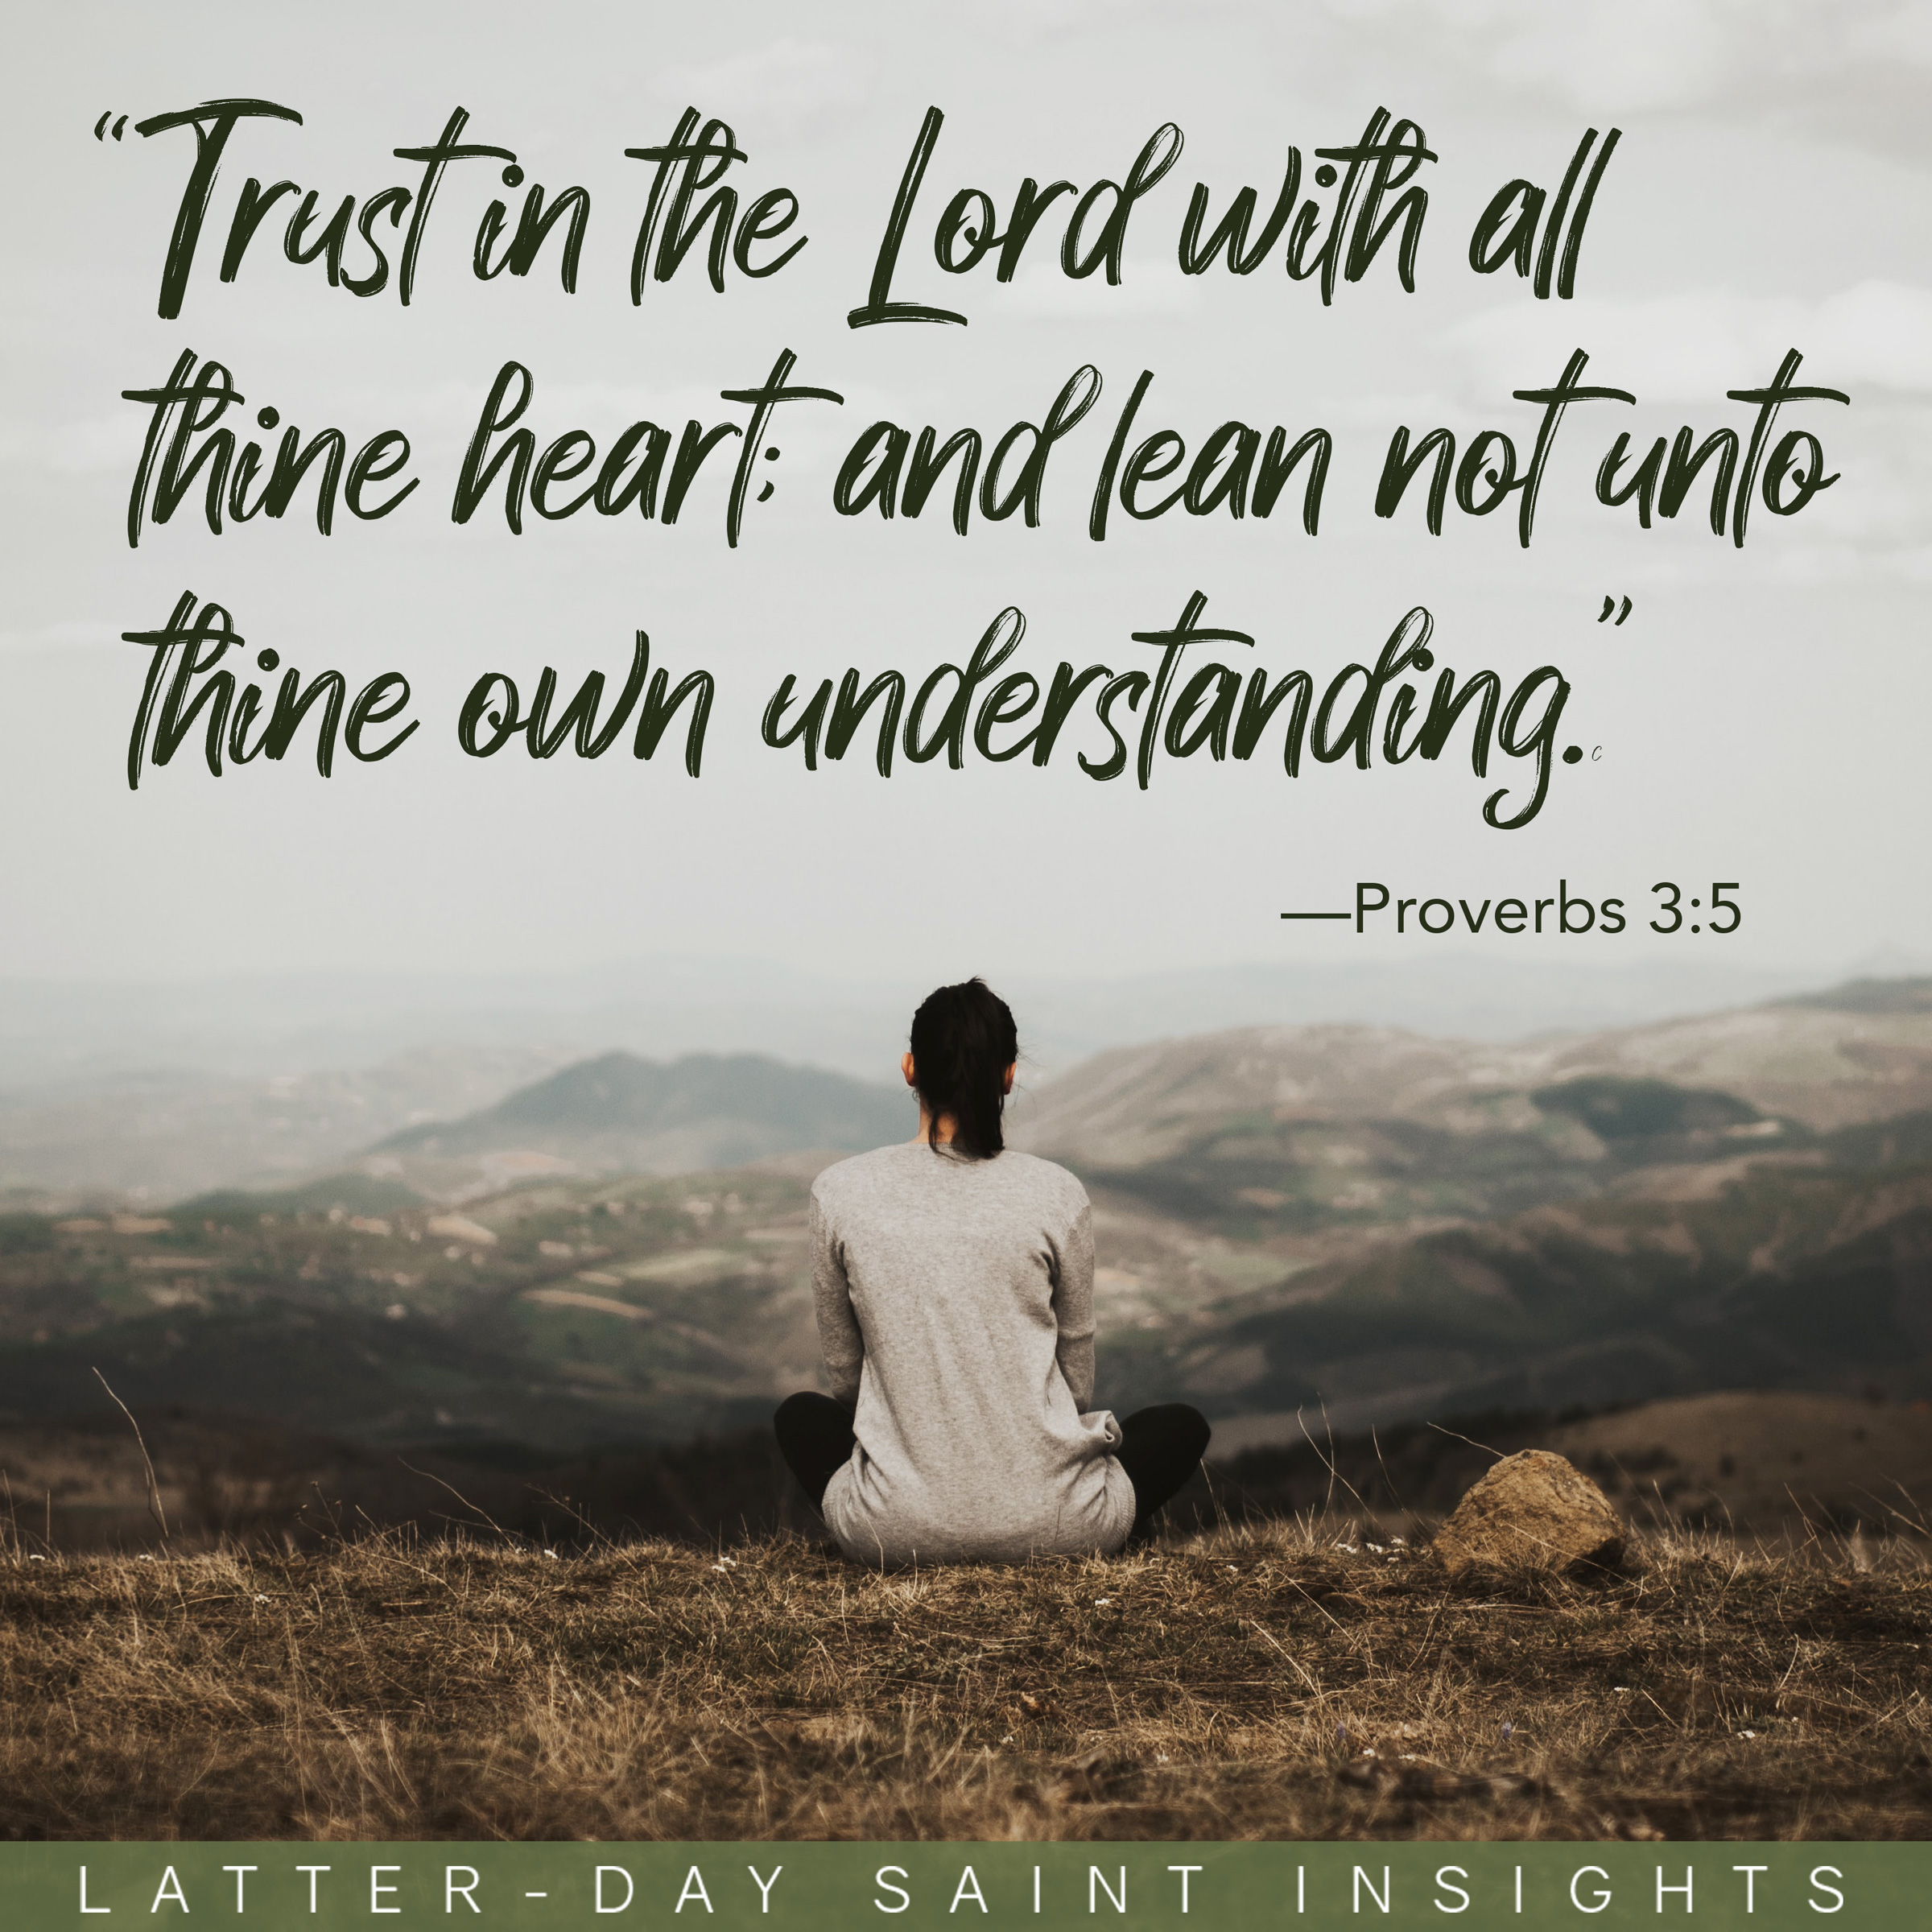 Woman sitting looking at scenery on a mountain with the words from Proverbs 3:5 that read, "Trust in the Lord with all thine heart and lean not unto thine own understanding."